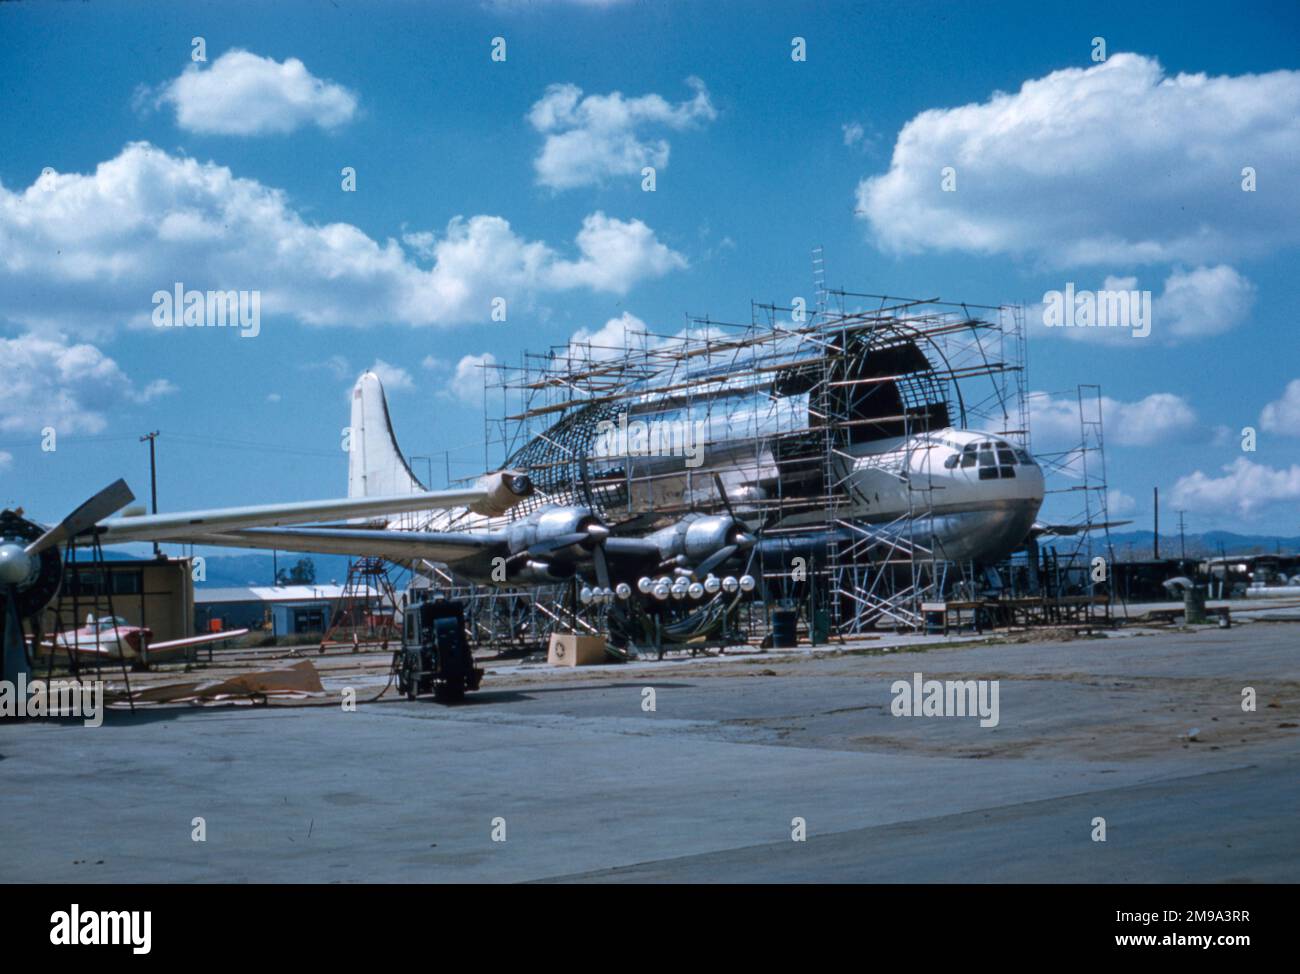 Pregnant Guppy N1024V under construction with On Mark Engineering at LAX - March 1962. The conversion was carried out in stages, First a portion of BOAC Stratocruiser was inserted in the rear fuselage and then the large outer shell of the cargo compartment was added to the standard B337 fuselage, for aerodynamic and structural trials. After the aircraft flew successfully and was demonstrated to Wernher von Braun, sufficient interest was generated to complete the conversion by cutting away the standard fuselage inside the large shell. - (photographer - AR Krieger) Stock Photo